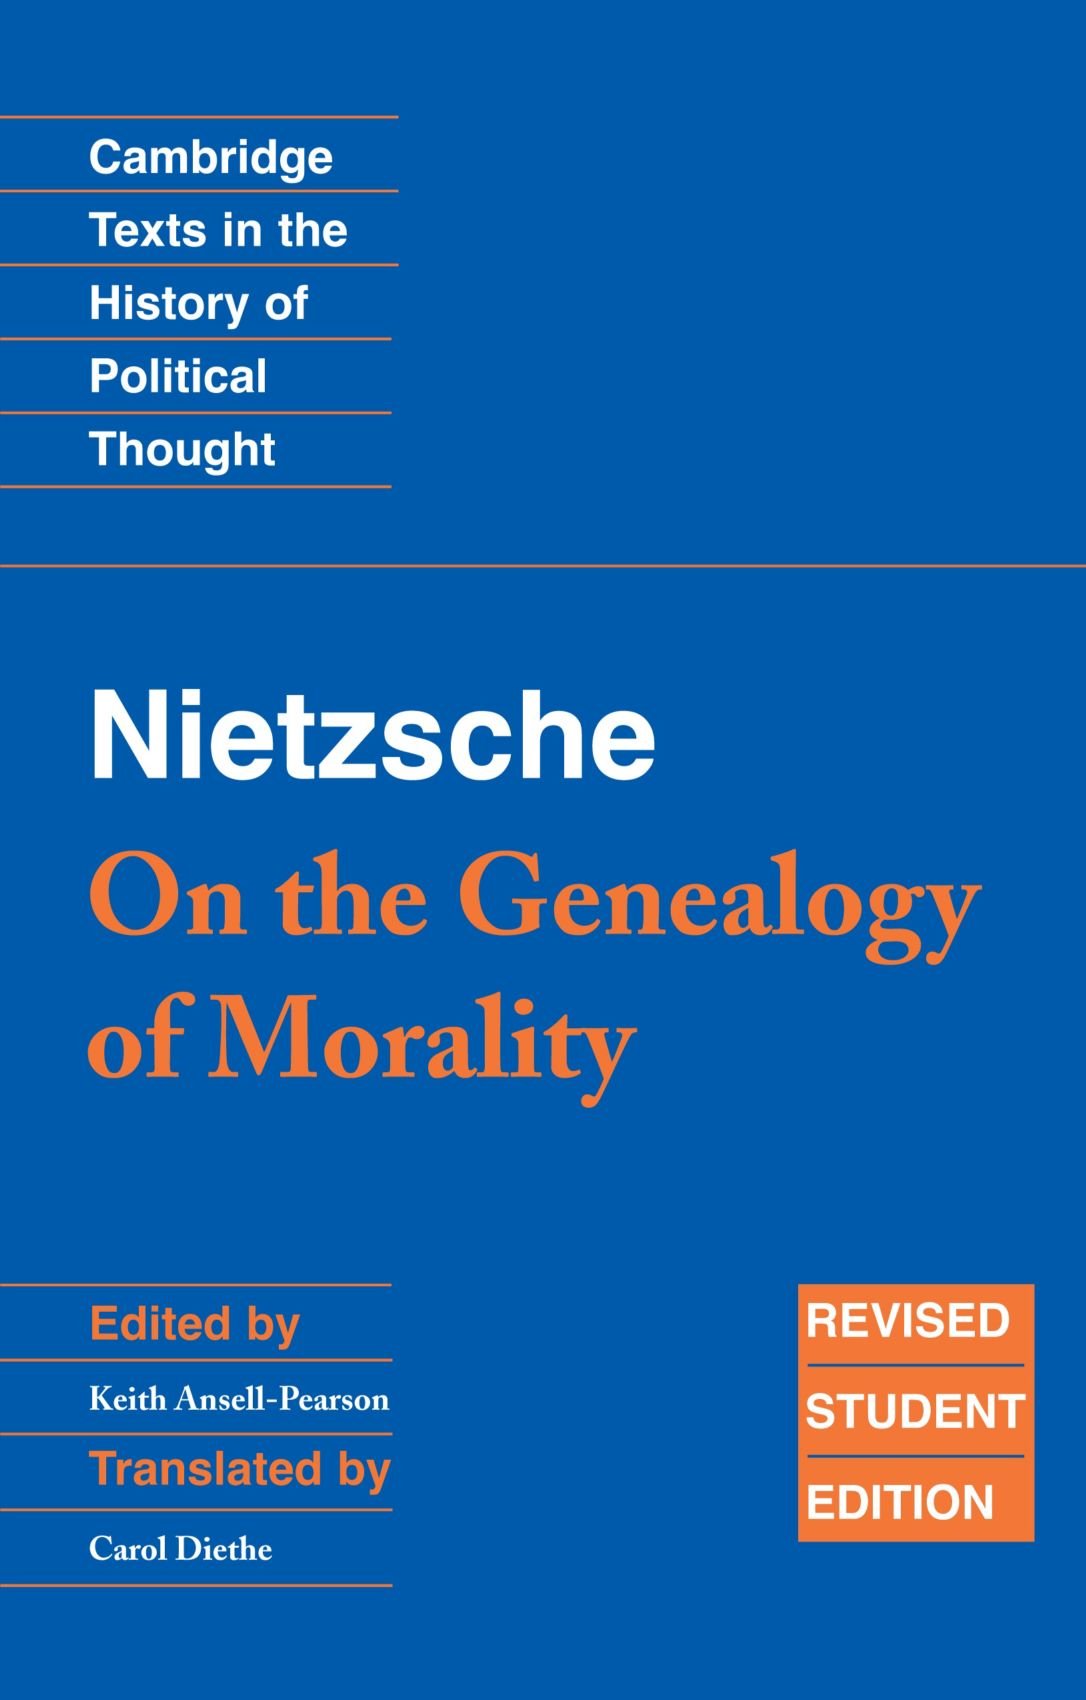 On the Geneanology of Morality